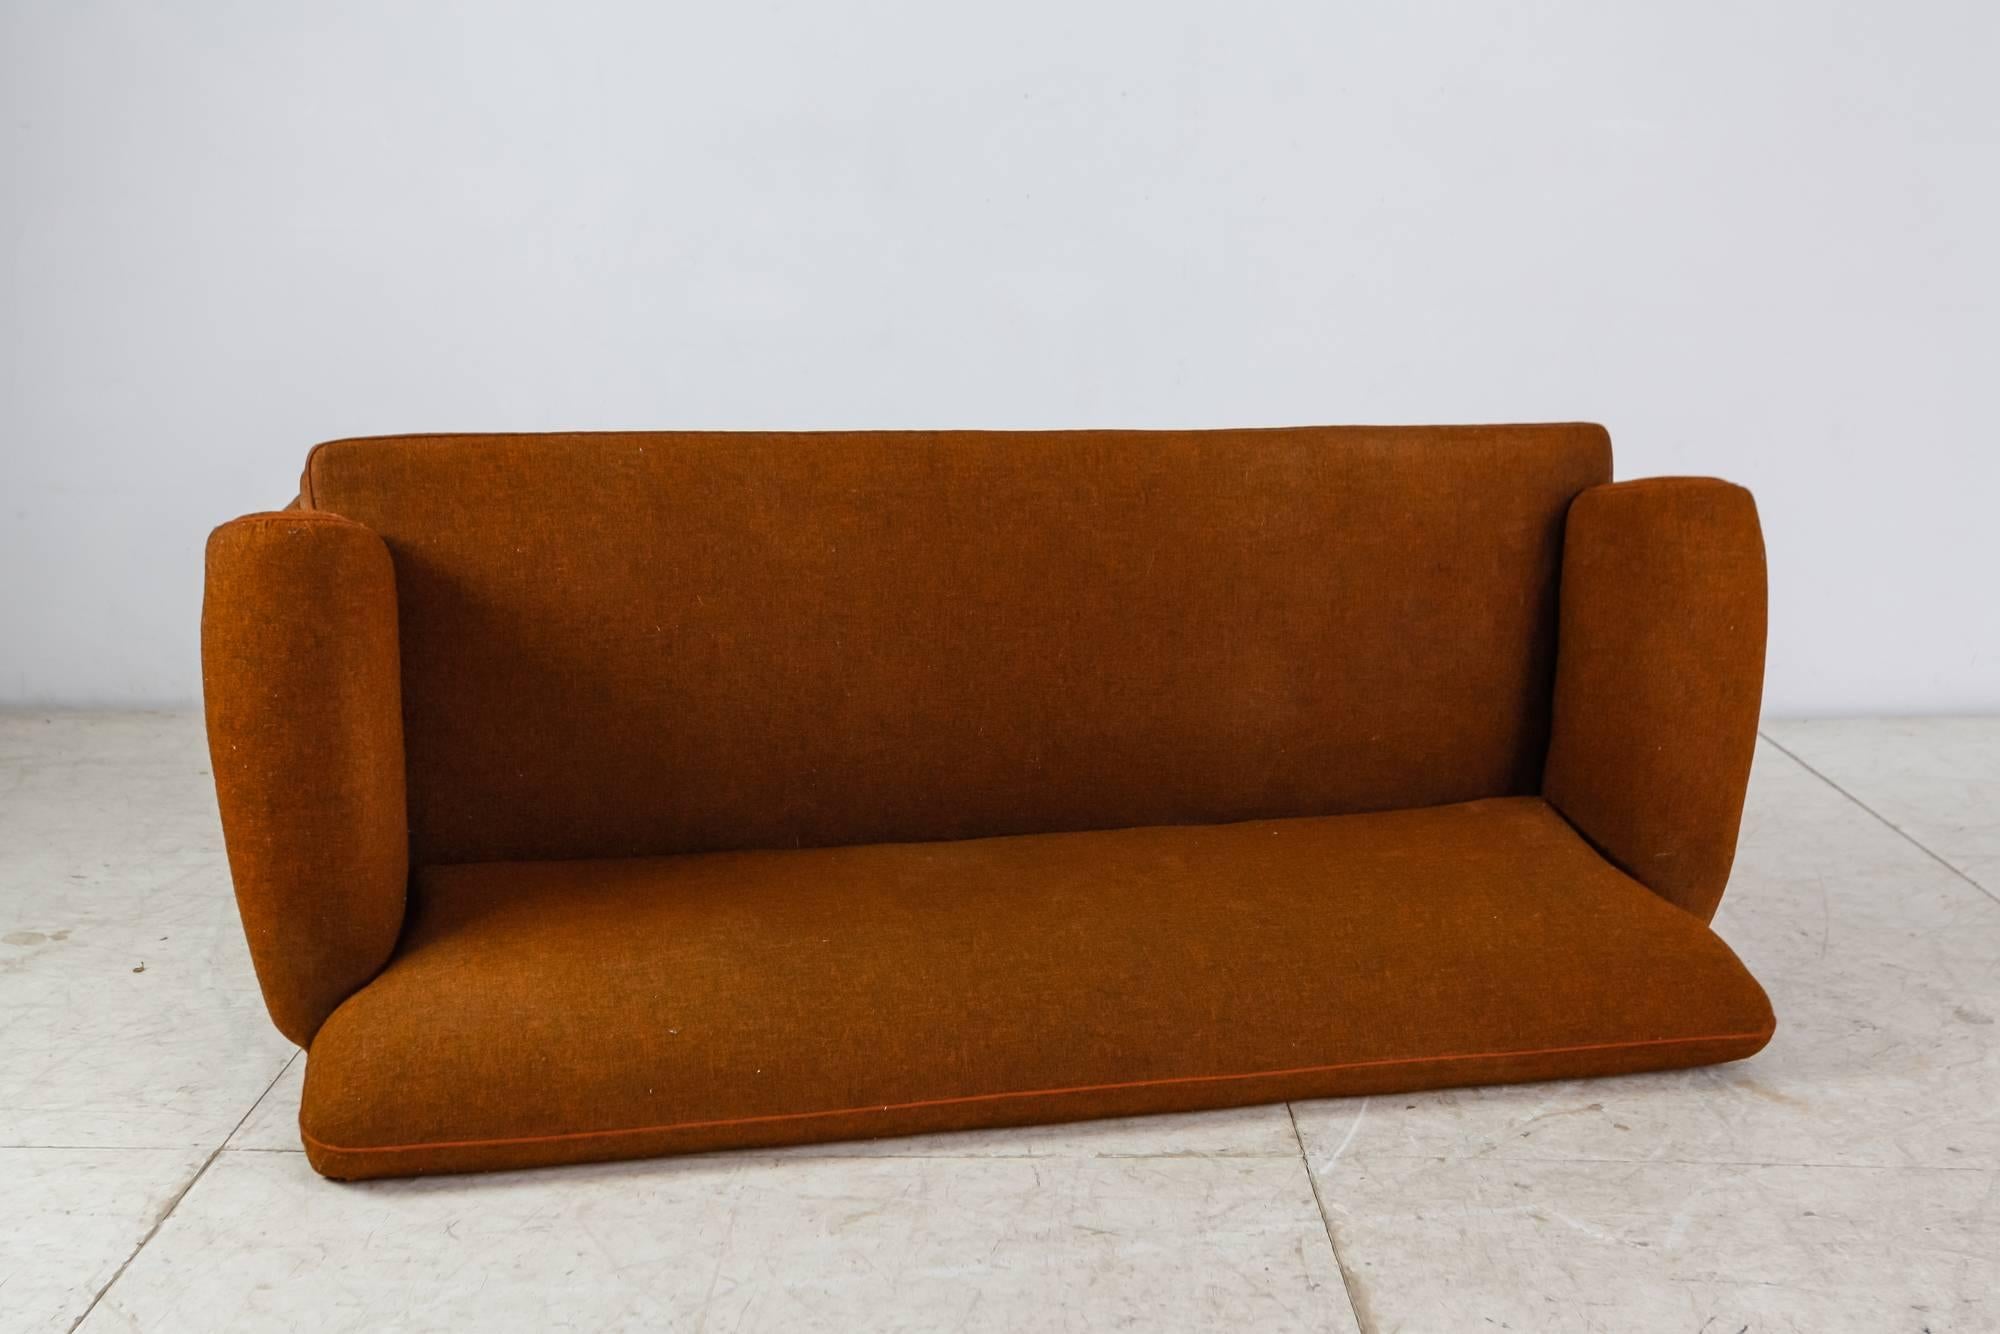 Stained Danish Rounded Three-Seat Sofa with Brown Wool Upholstery, 1940s For Sale